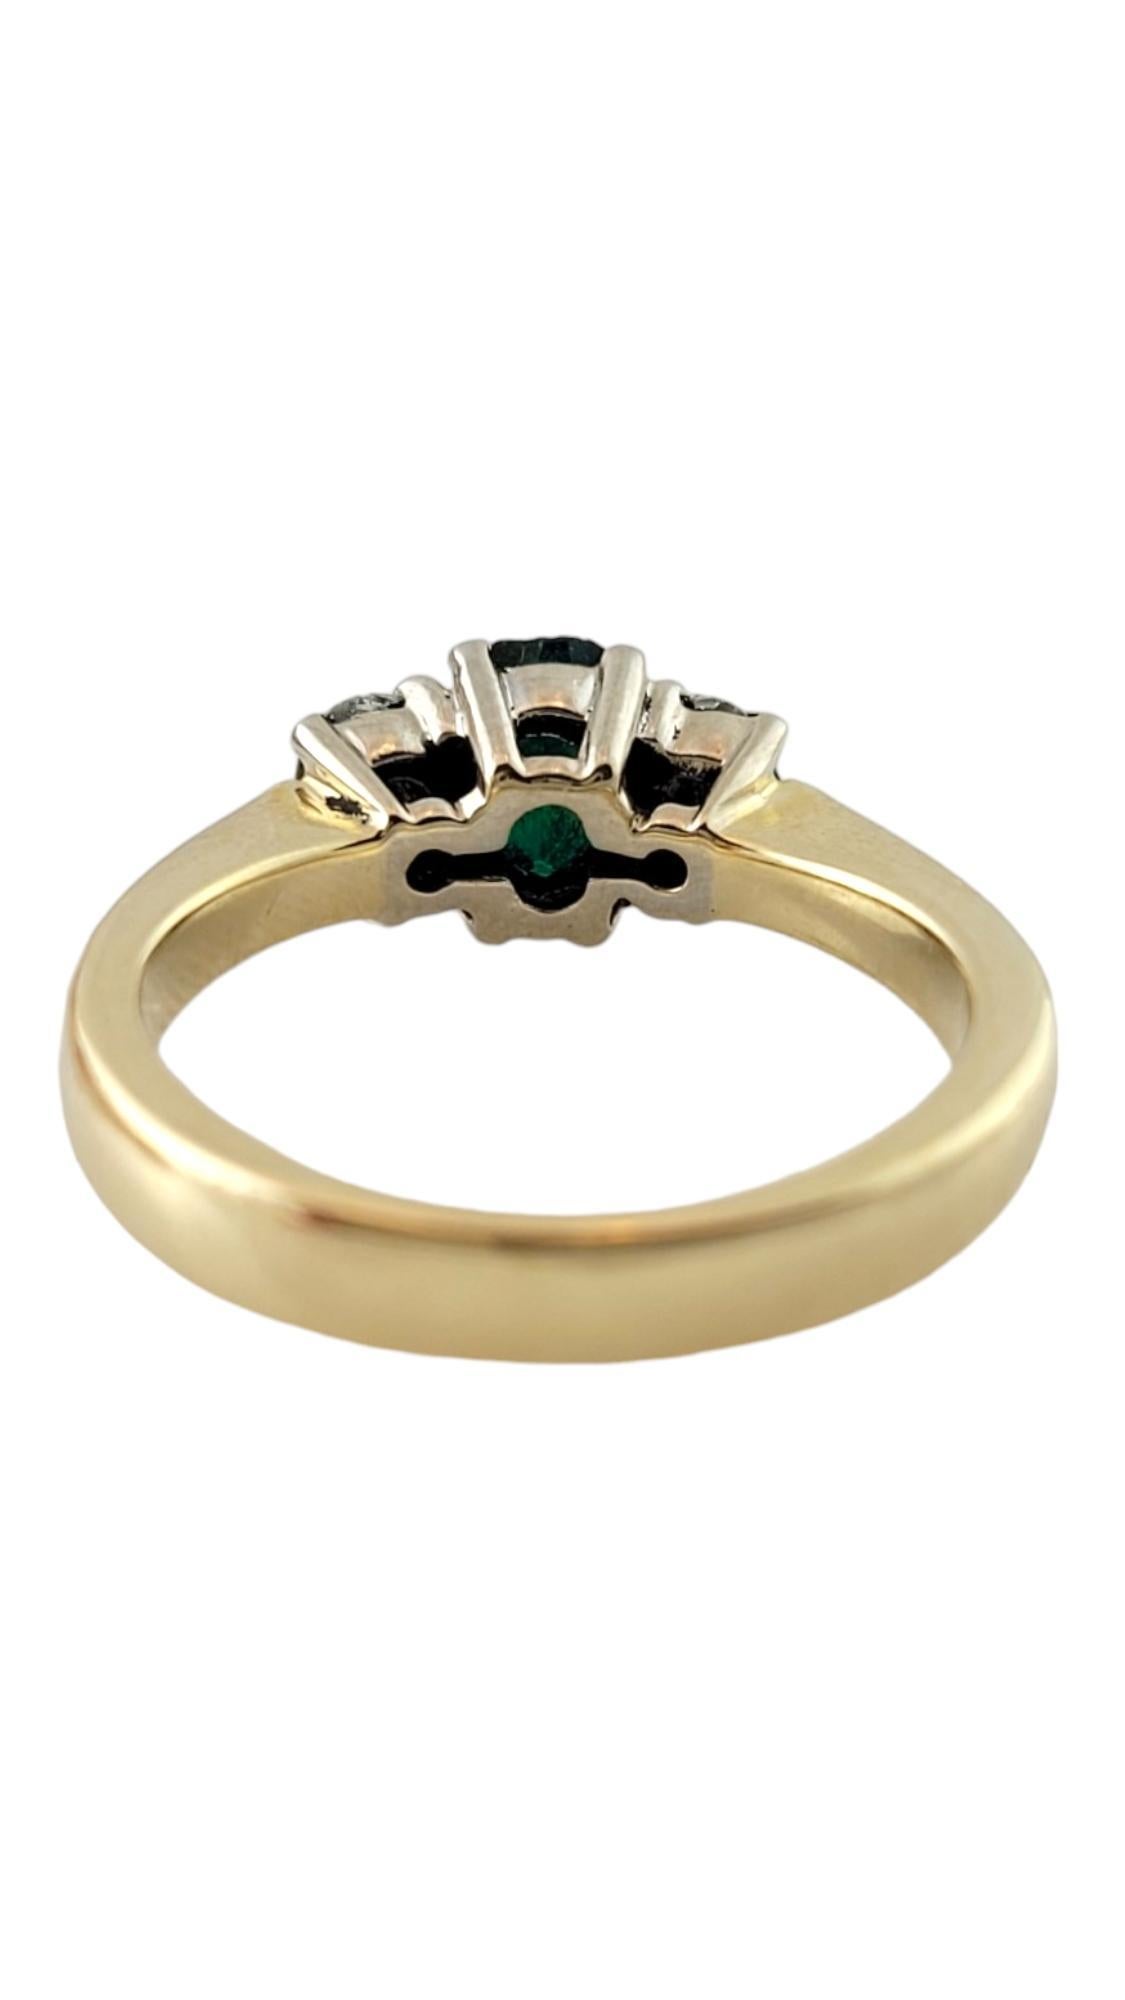 14 Karat Yellow Gold Natural Emerald and Diamond Ring Size 6-6.25 #16455 In Good Condition For Sale In Washington Depot, CT